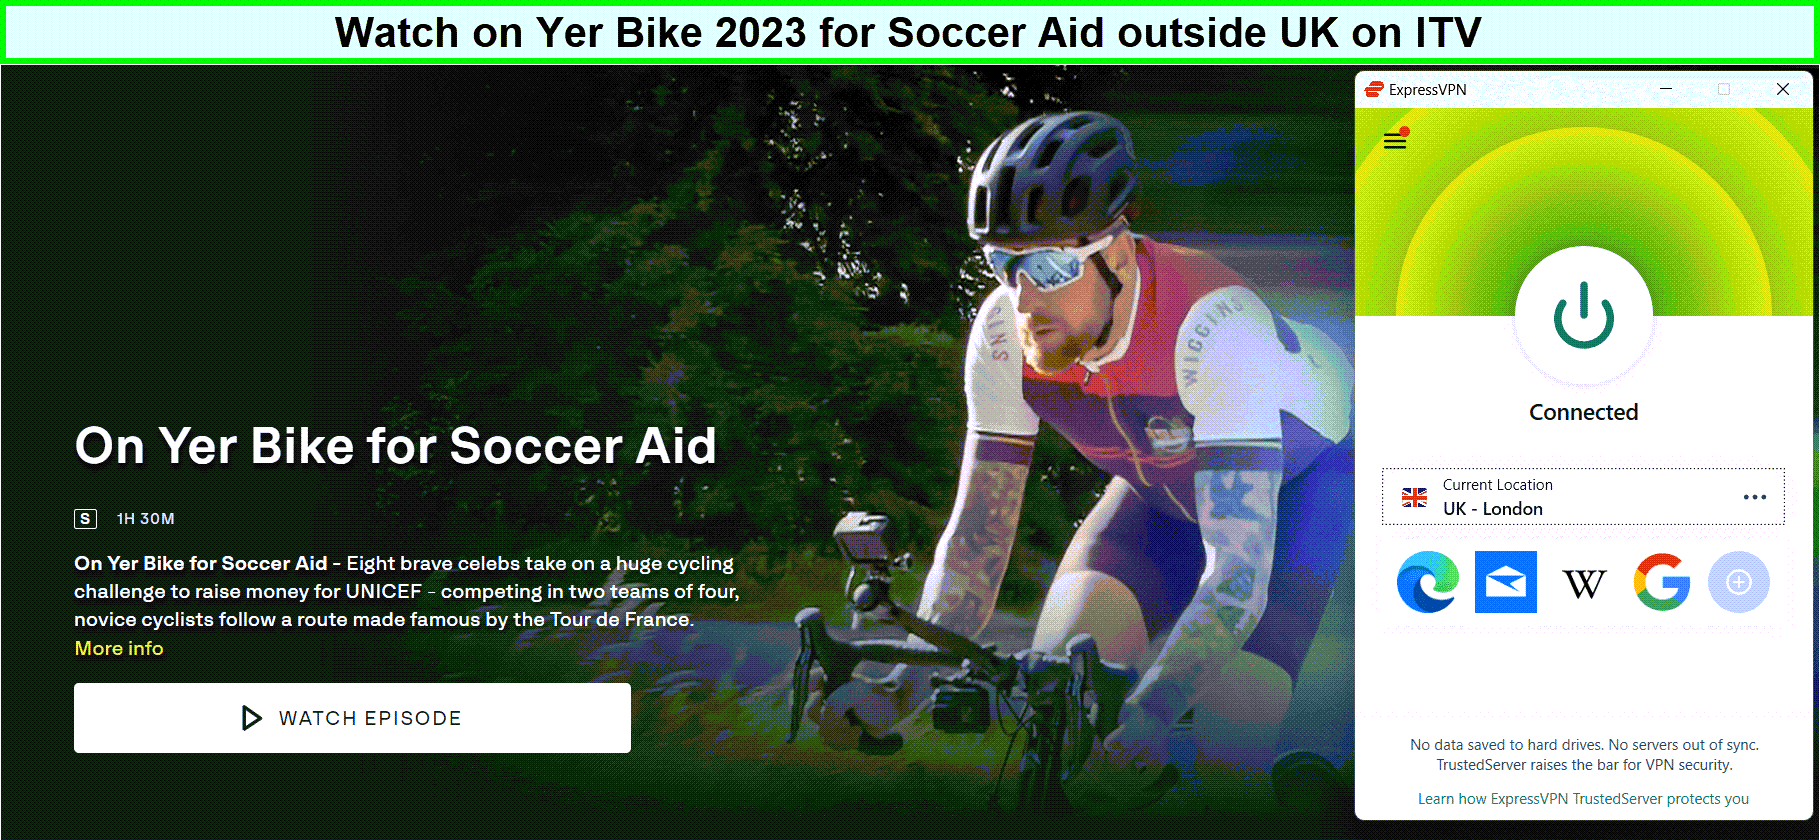 Watch-On-Yer-Bike-2023-for-Soccer-Aid-in-Australia-on-ITV-with-ExpressVPN